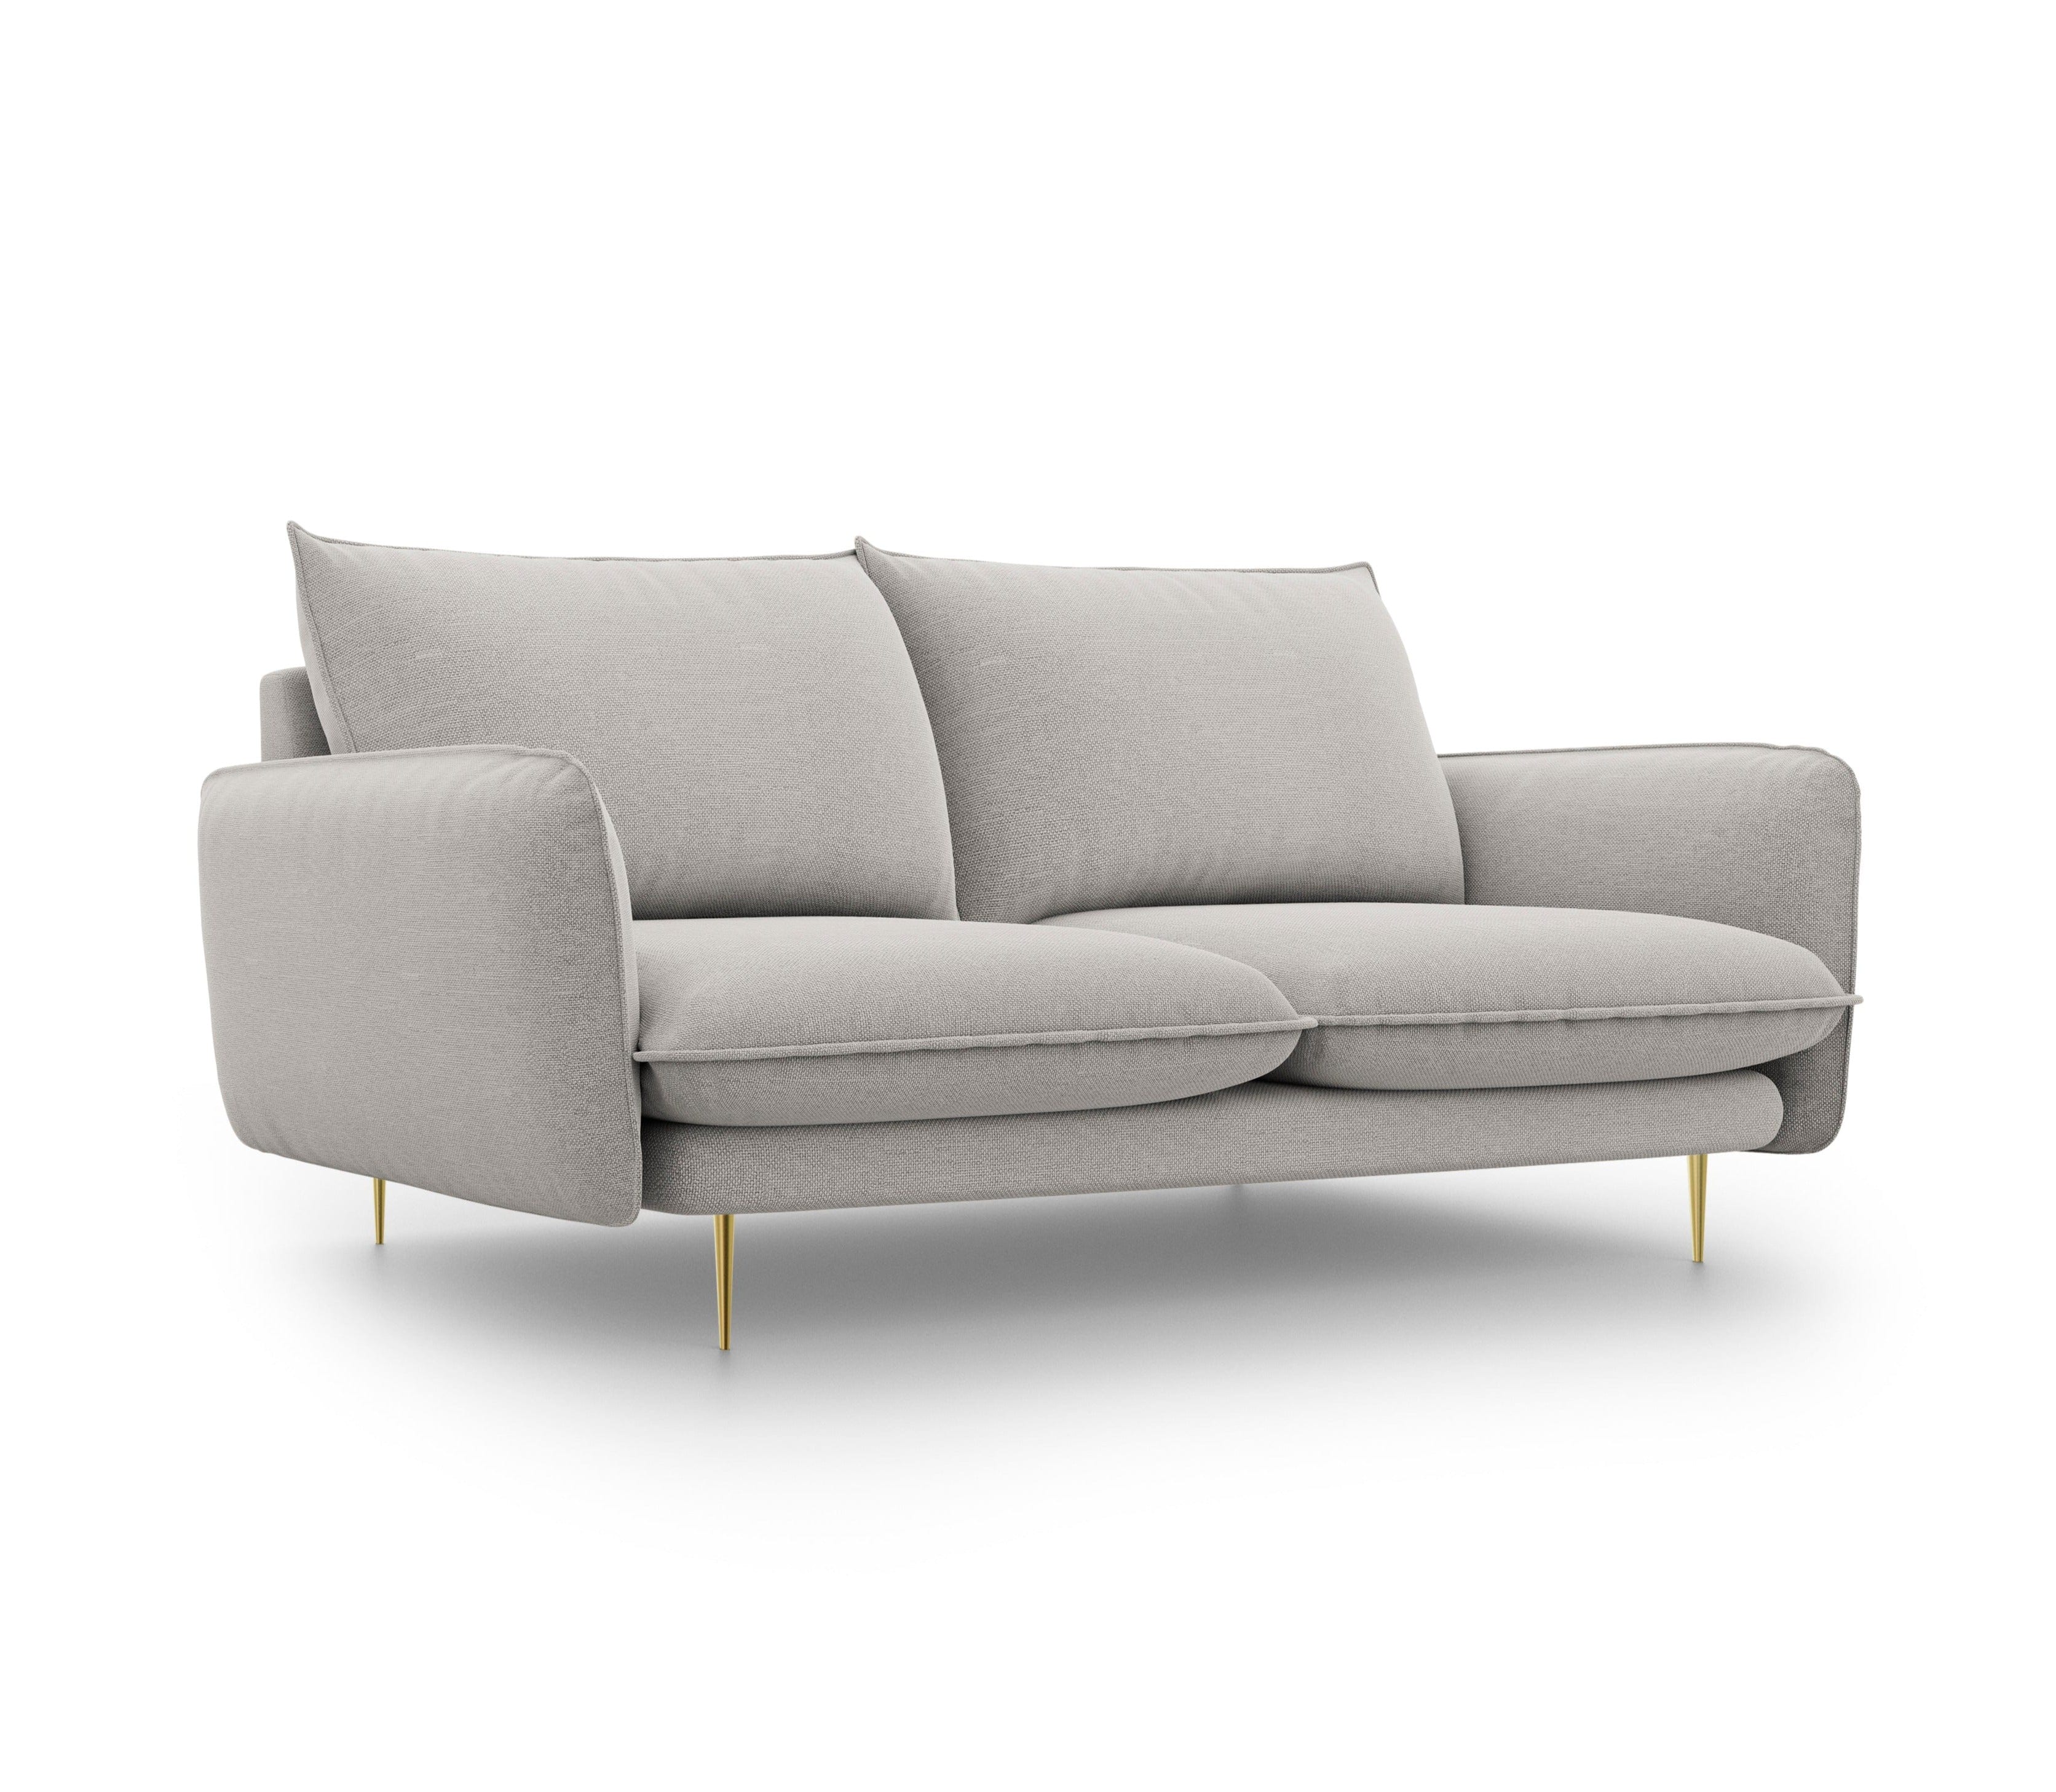 2-seater sofa VIENNA light grey with gold base